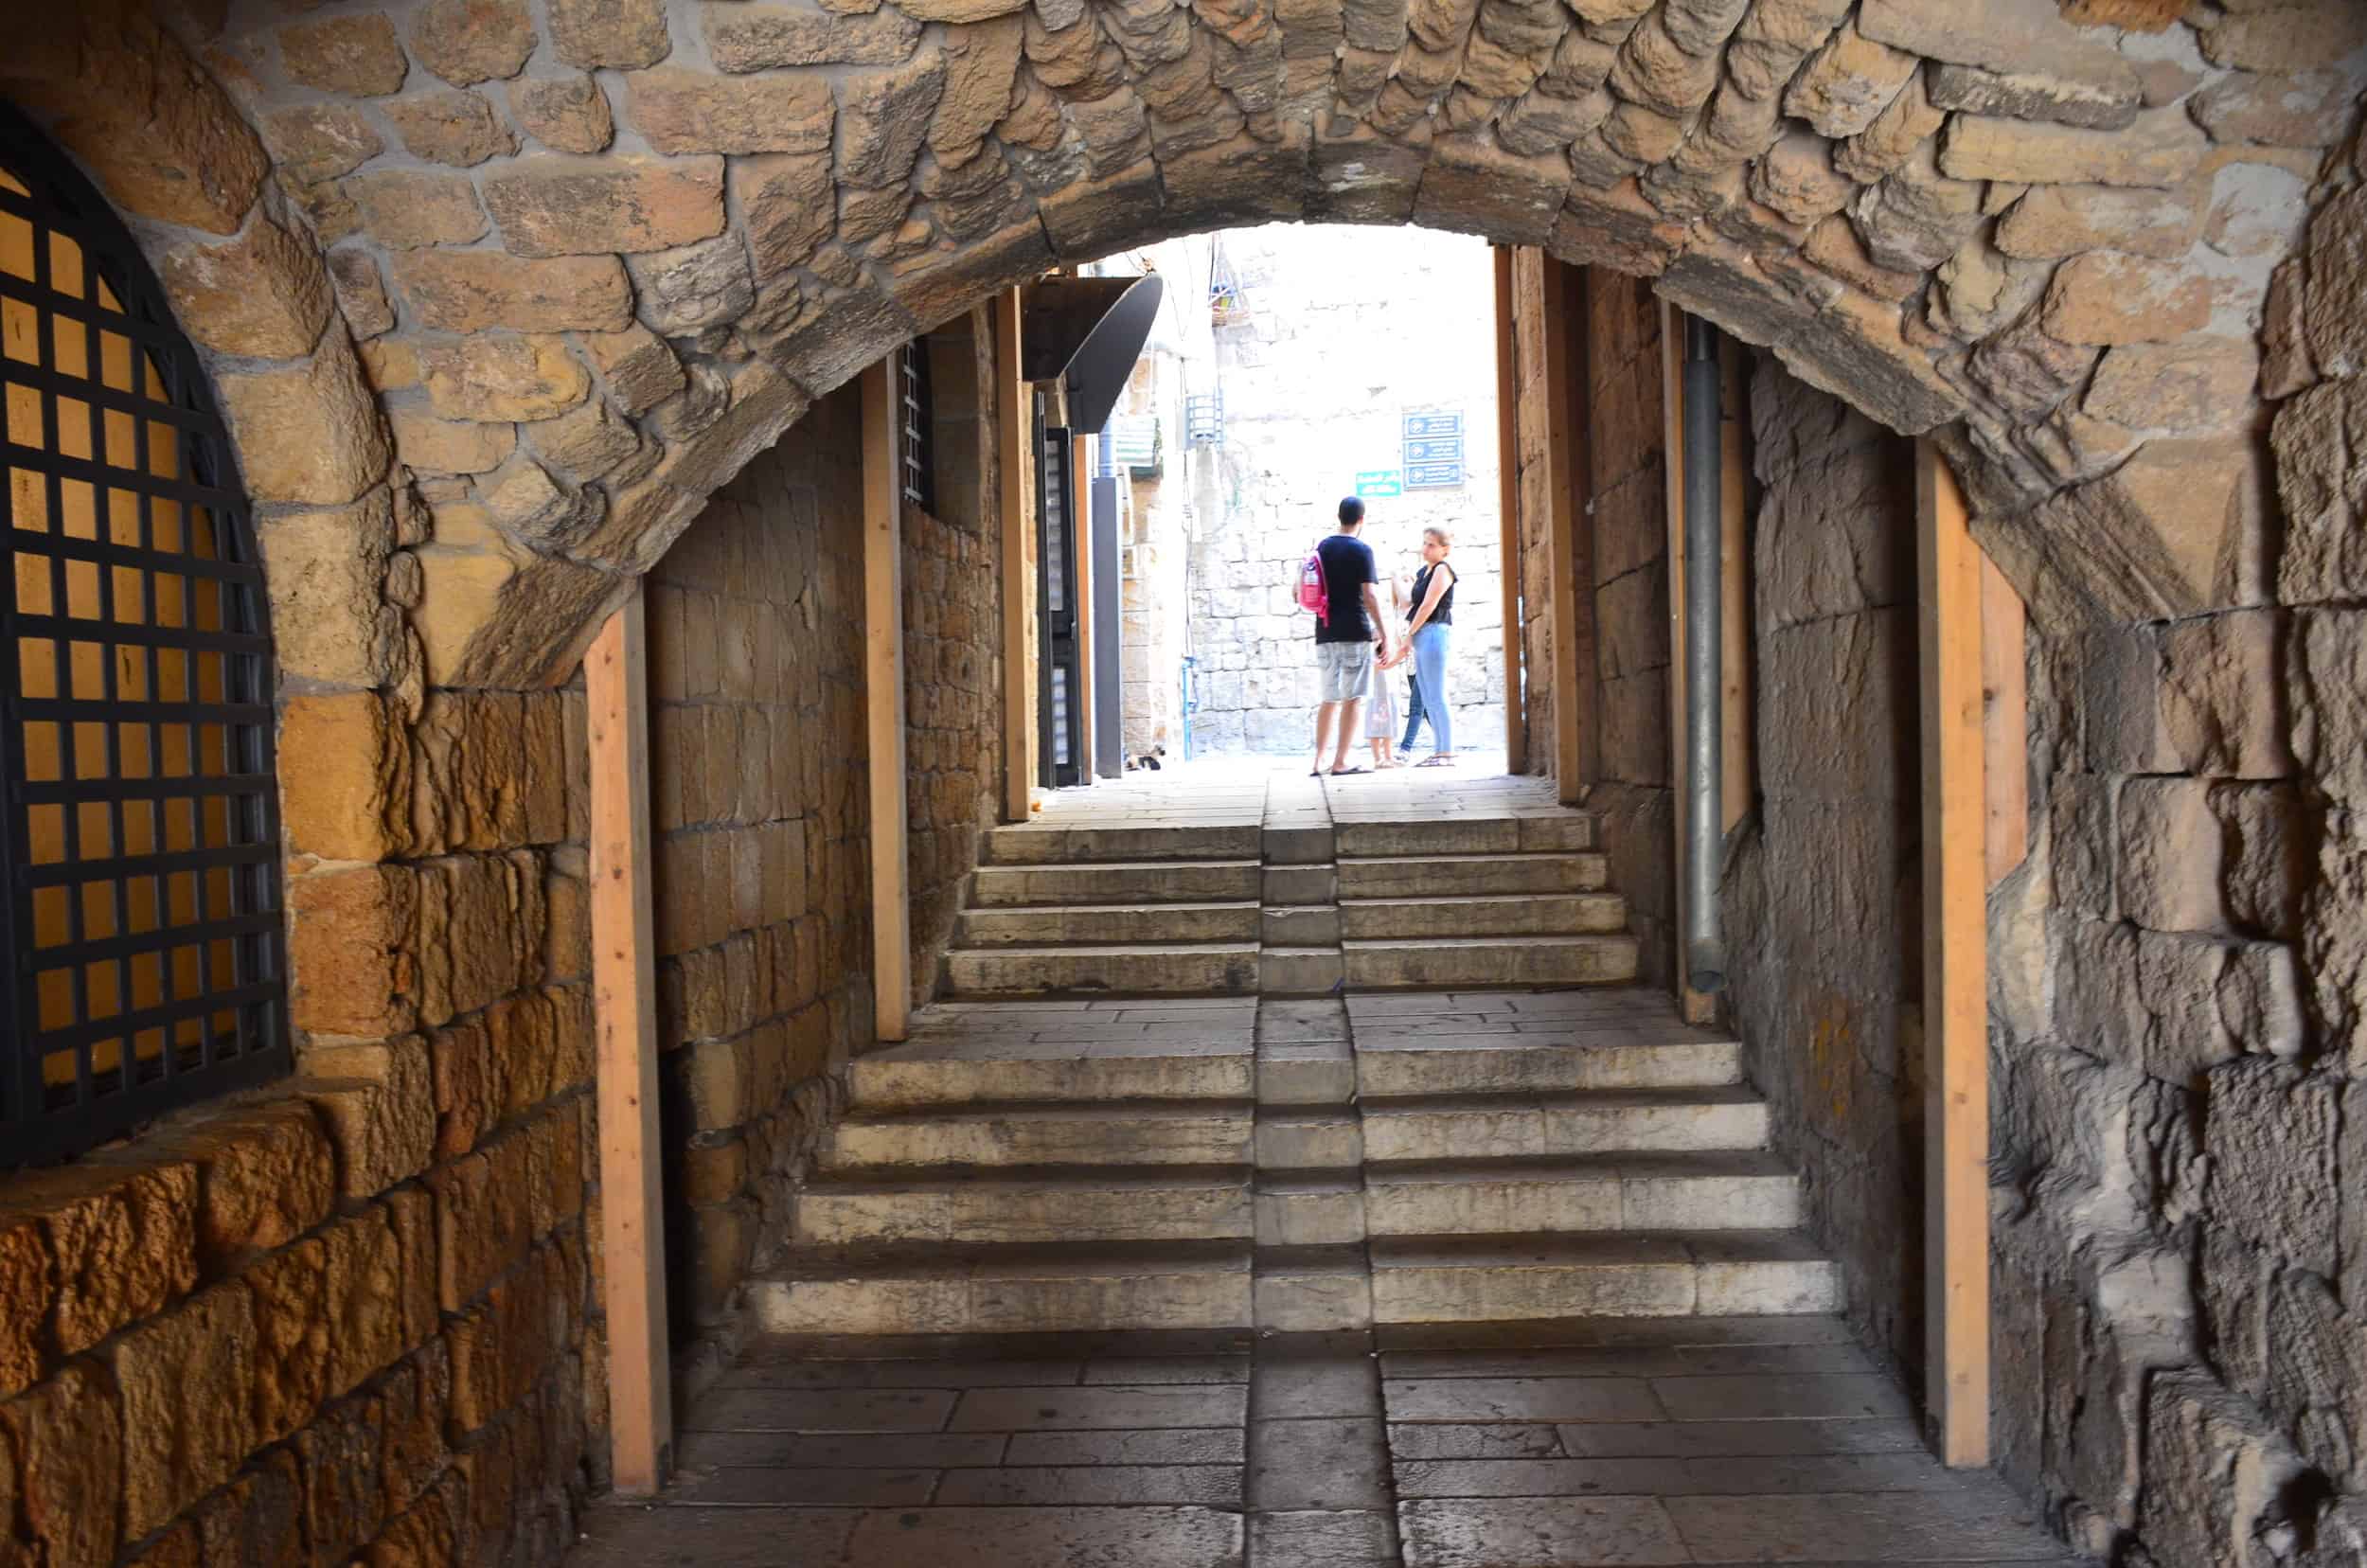 Corridor in the Old City in Acre, Israel